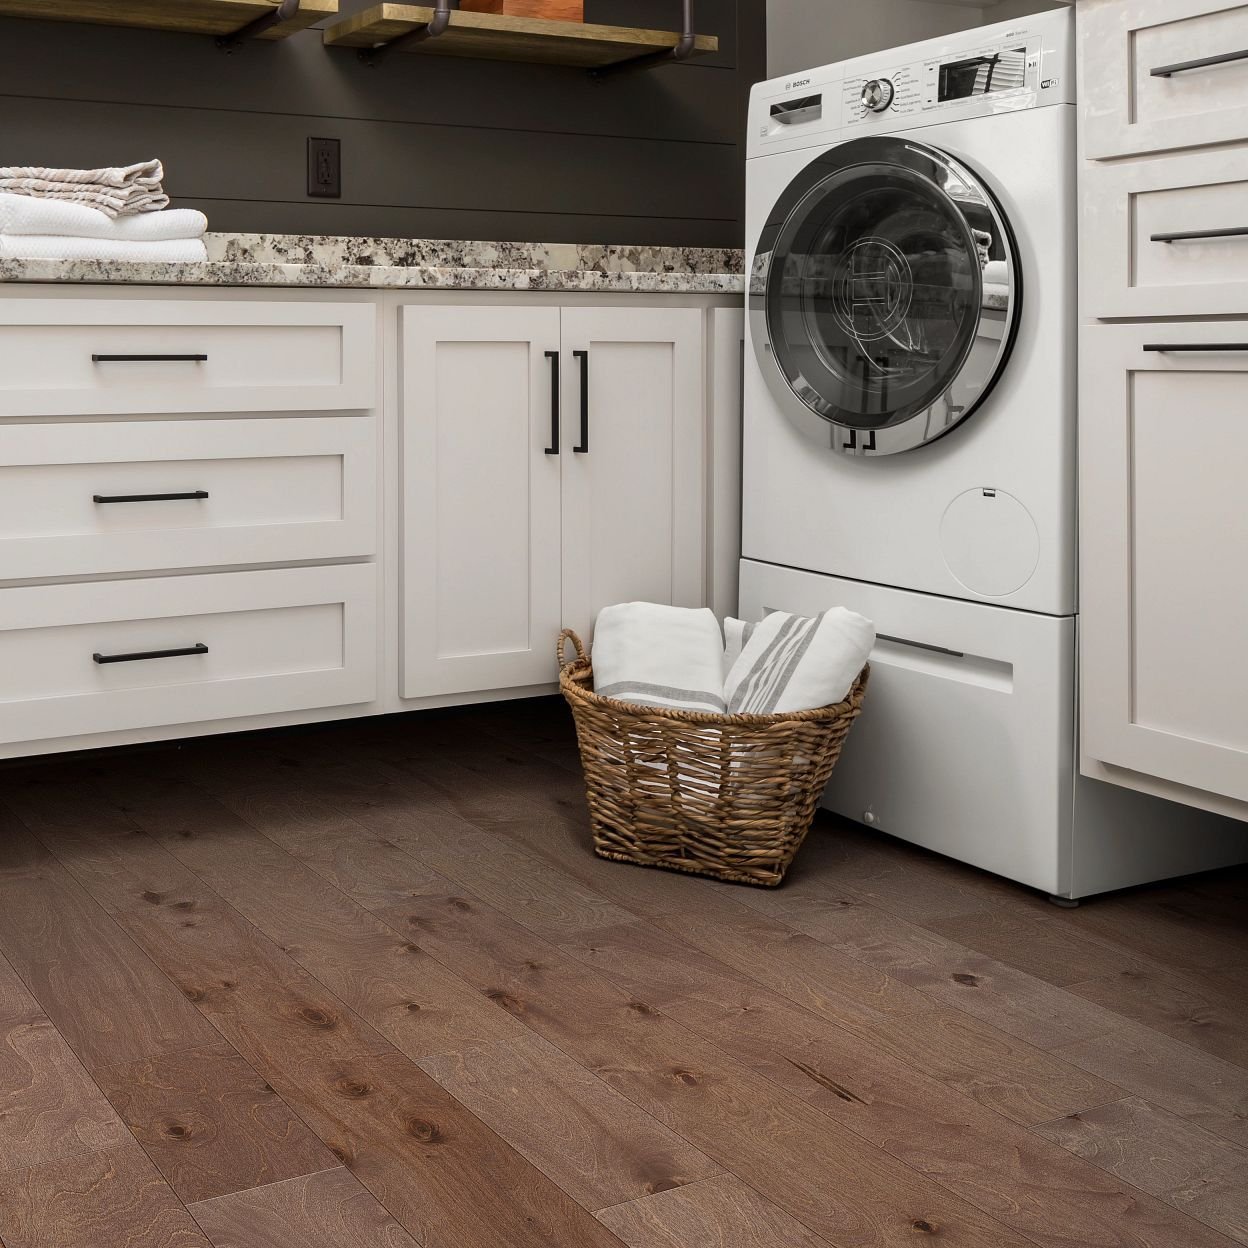 the bathroom vinyl flooring resists even the wear caused by a washing machine